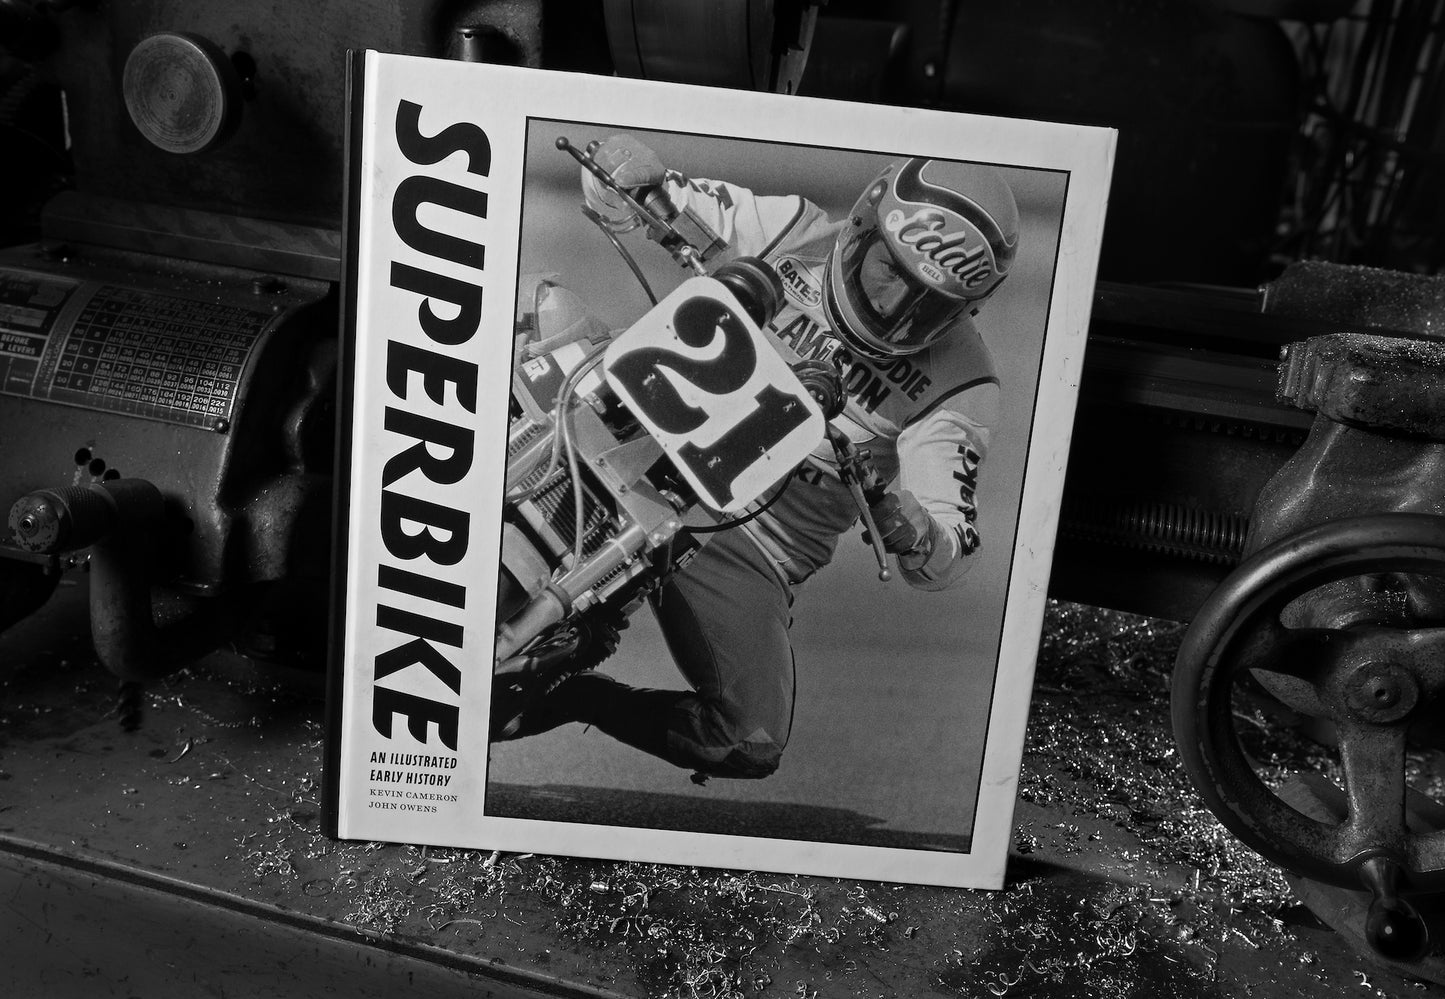 SUPERBIKE: AN ILLUSTRATED EARLY HISTORY